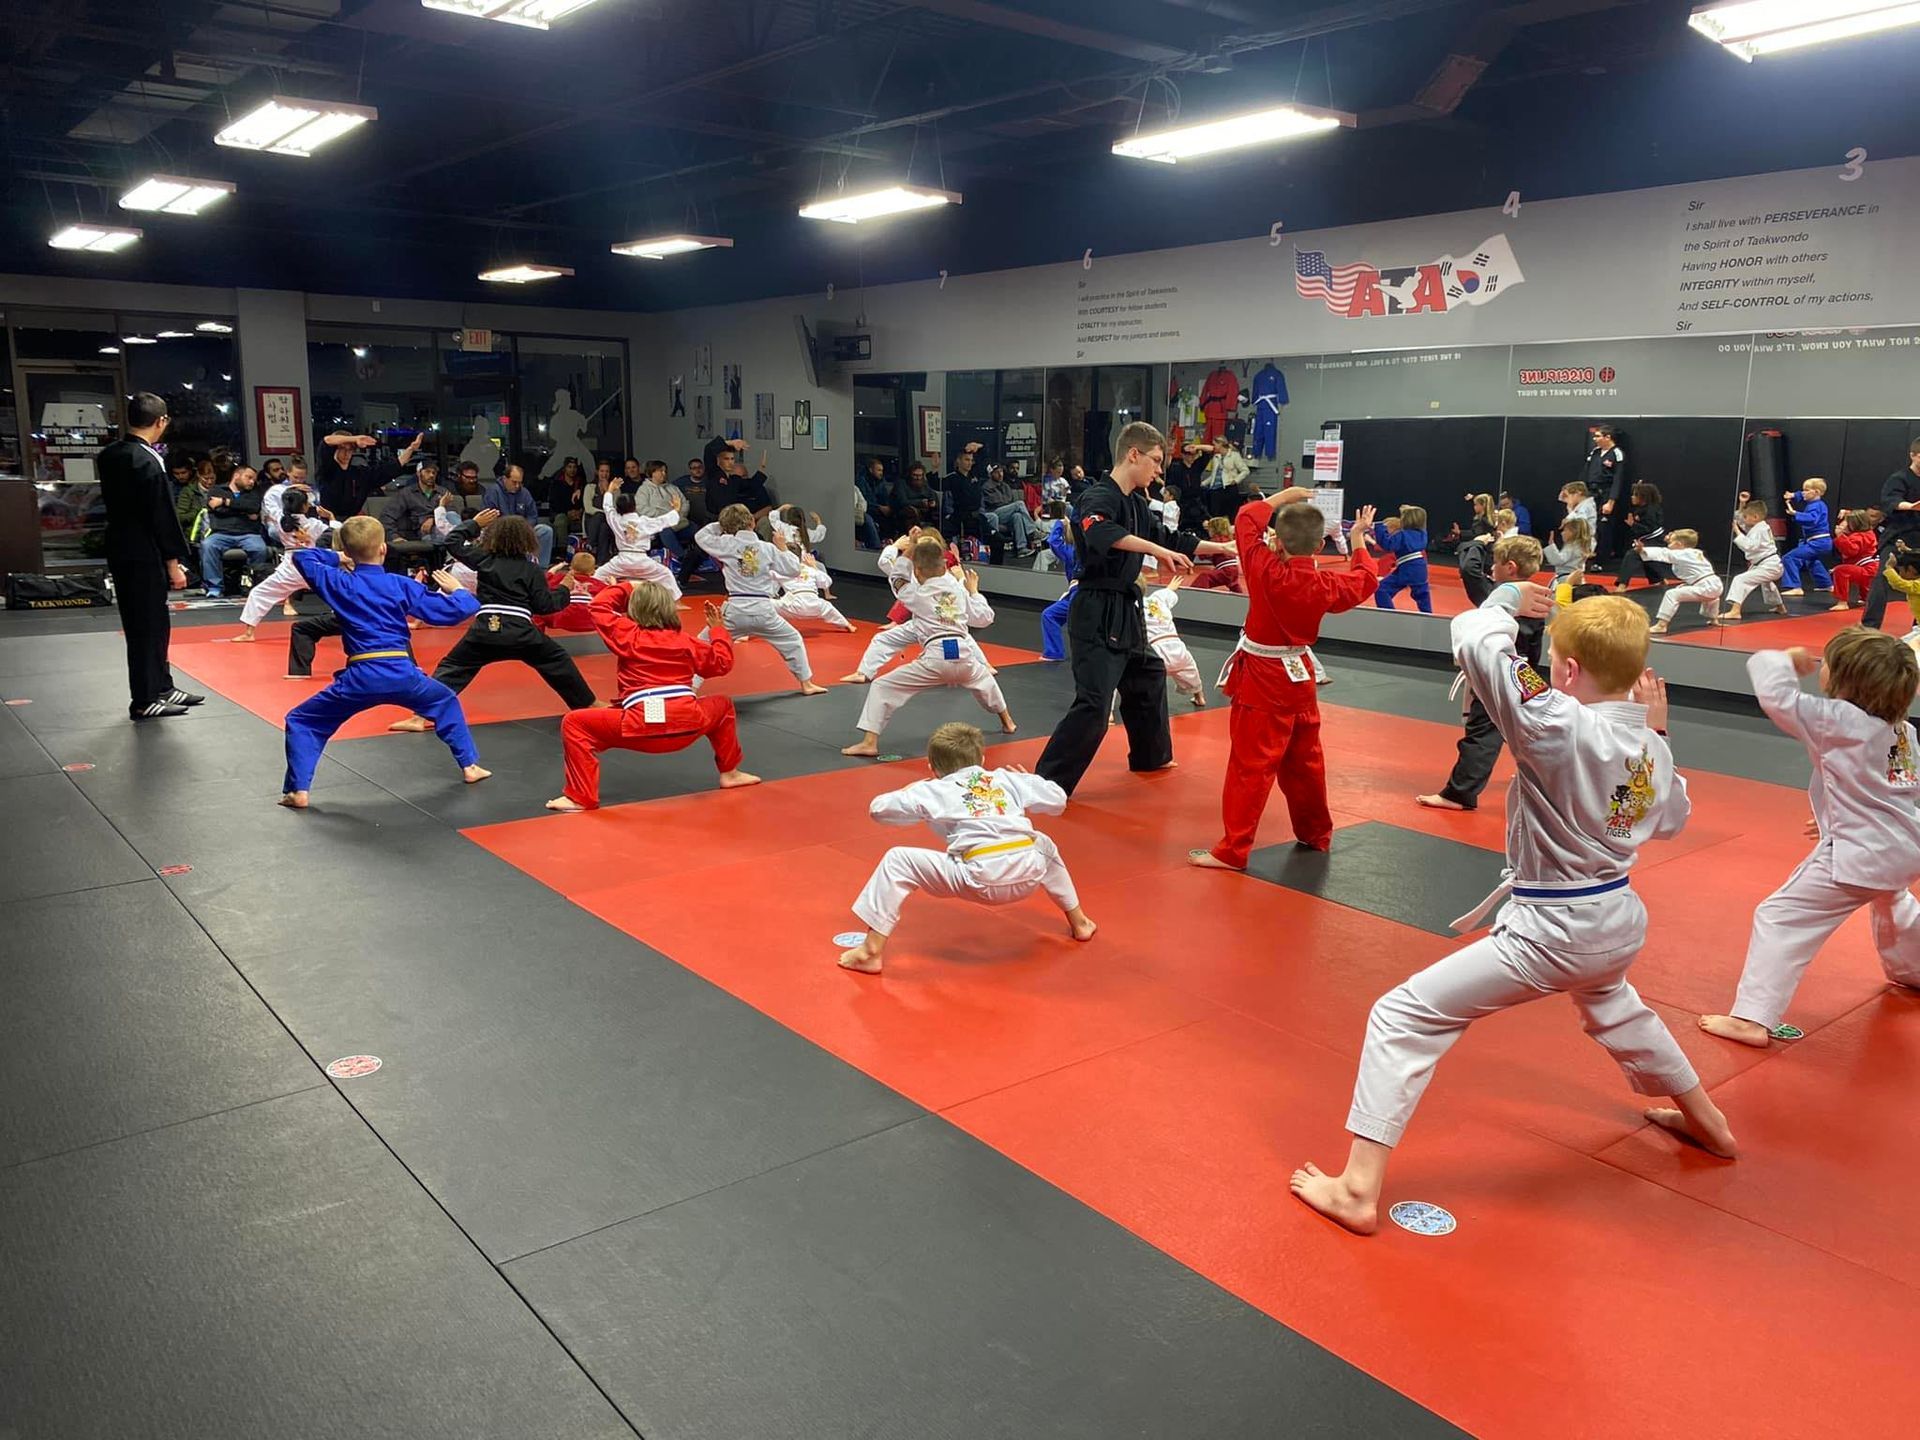 A group of children are practicing martial arts in a gym.